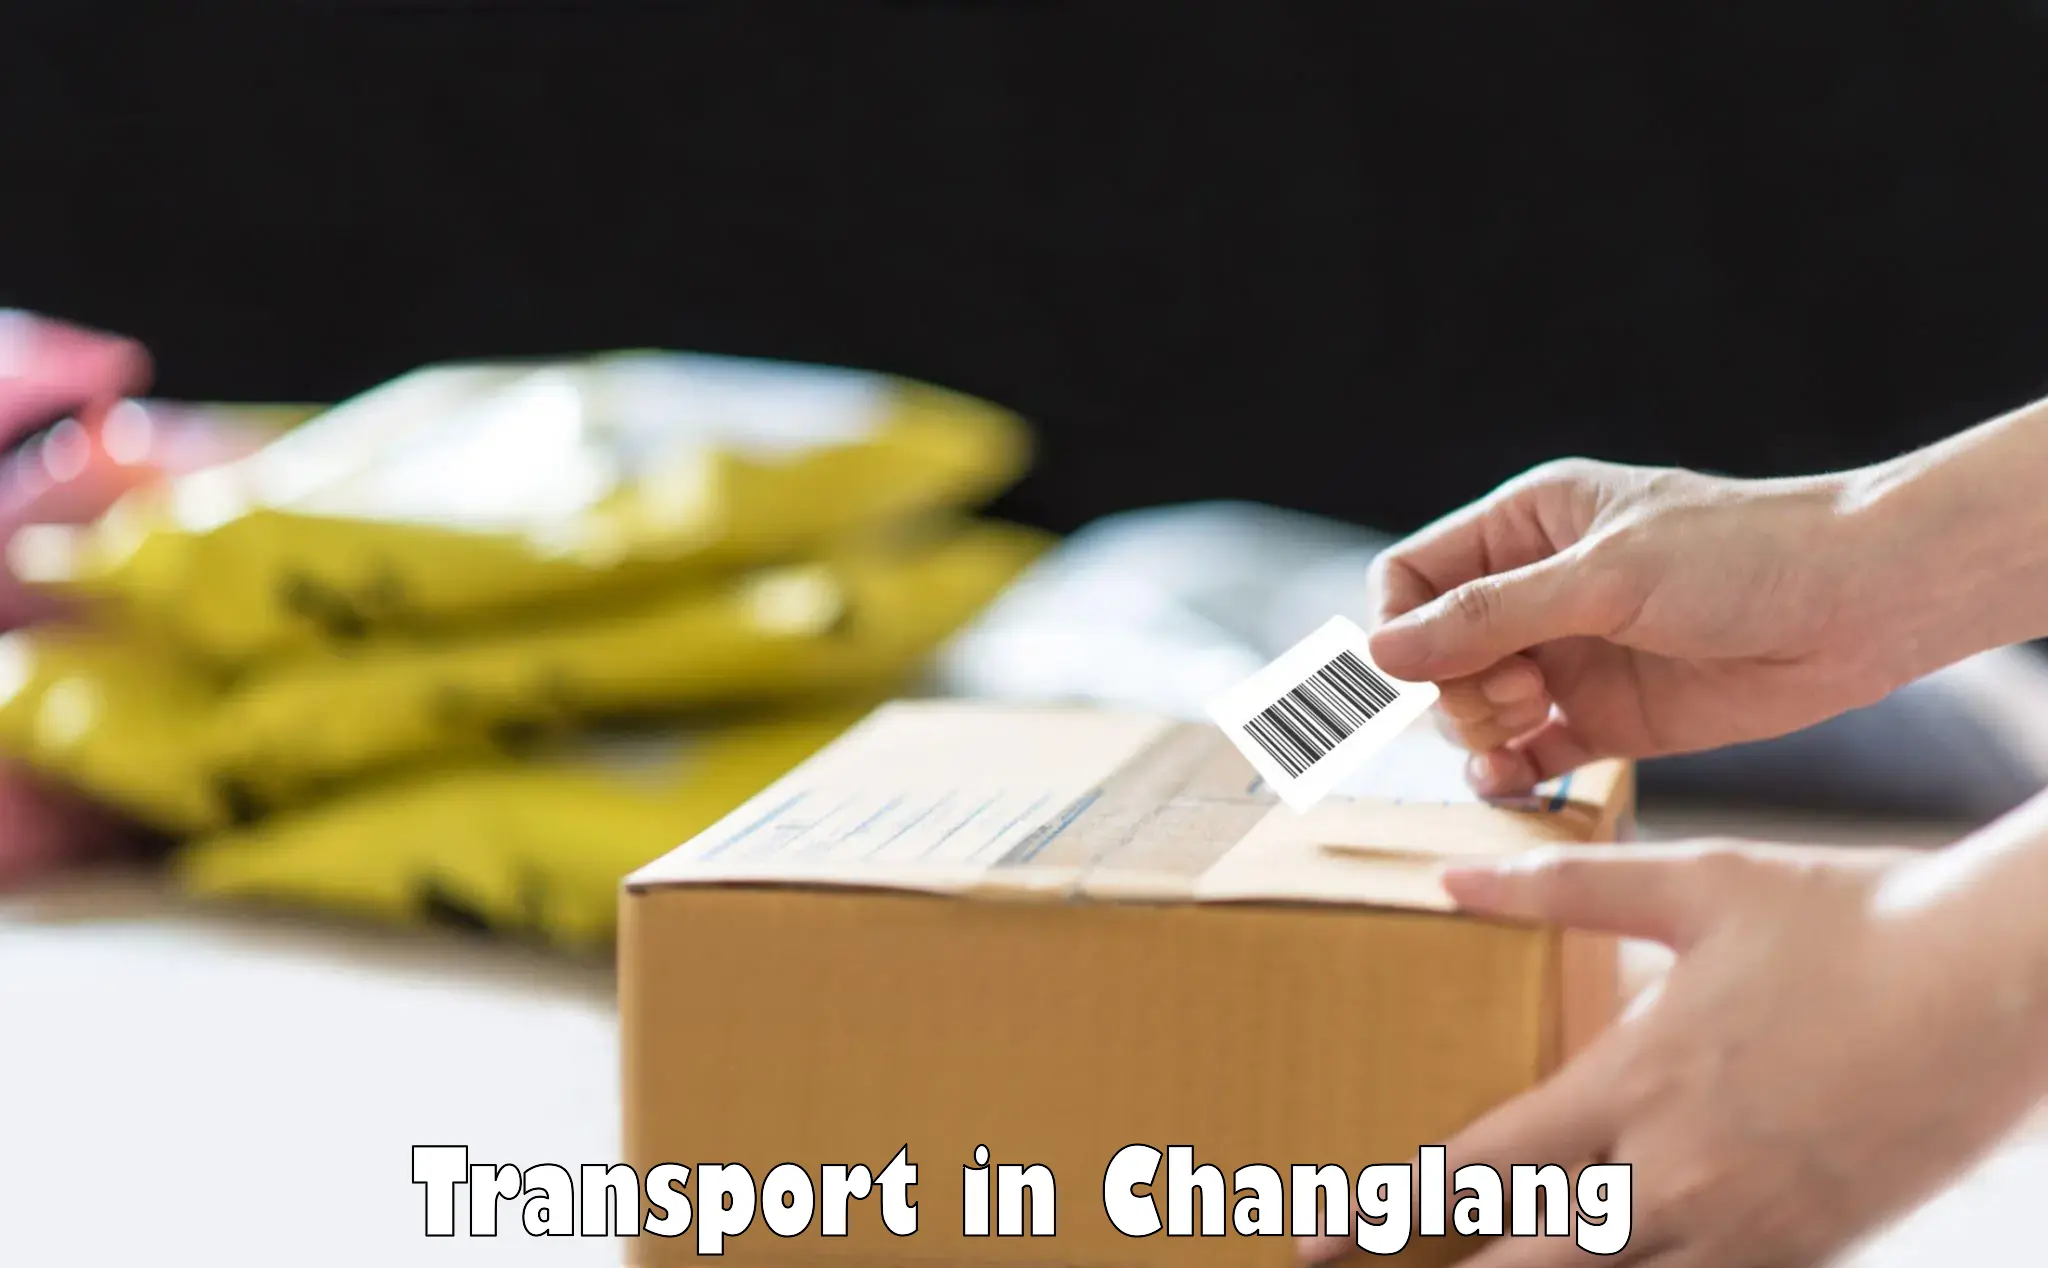 Container transportation services in Changlang